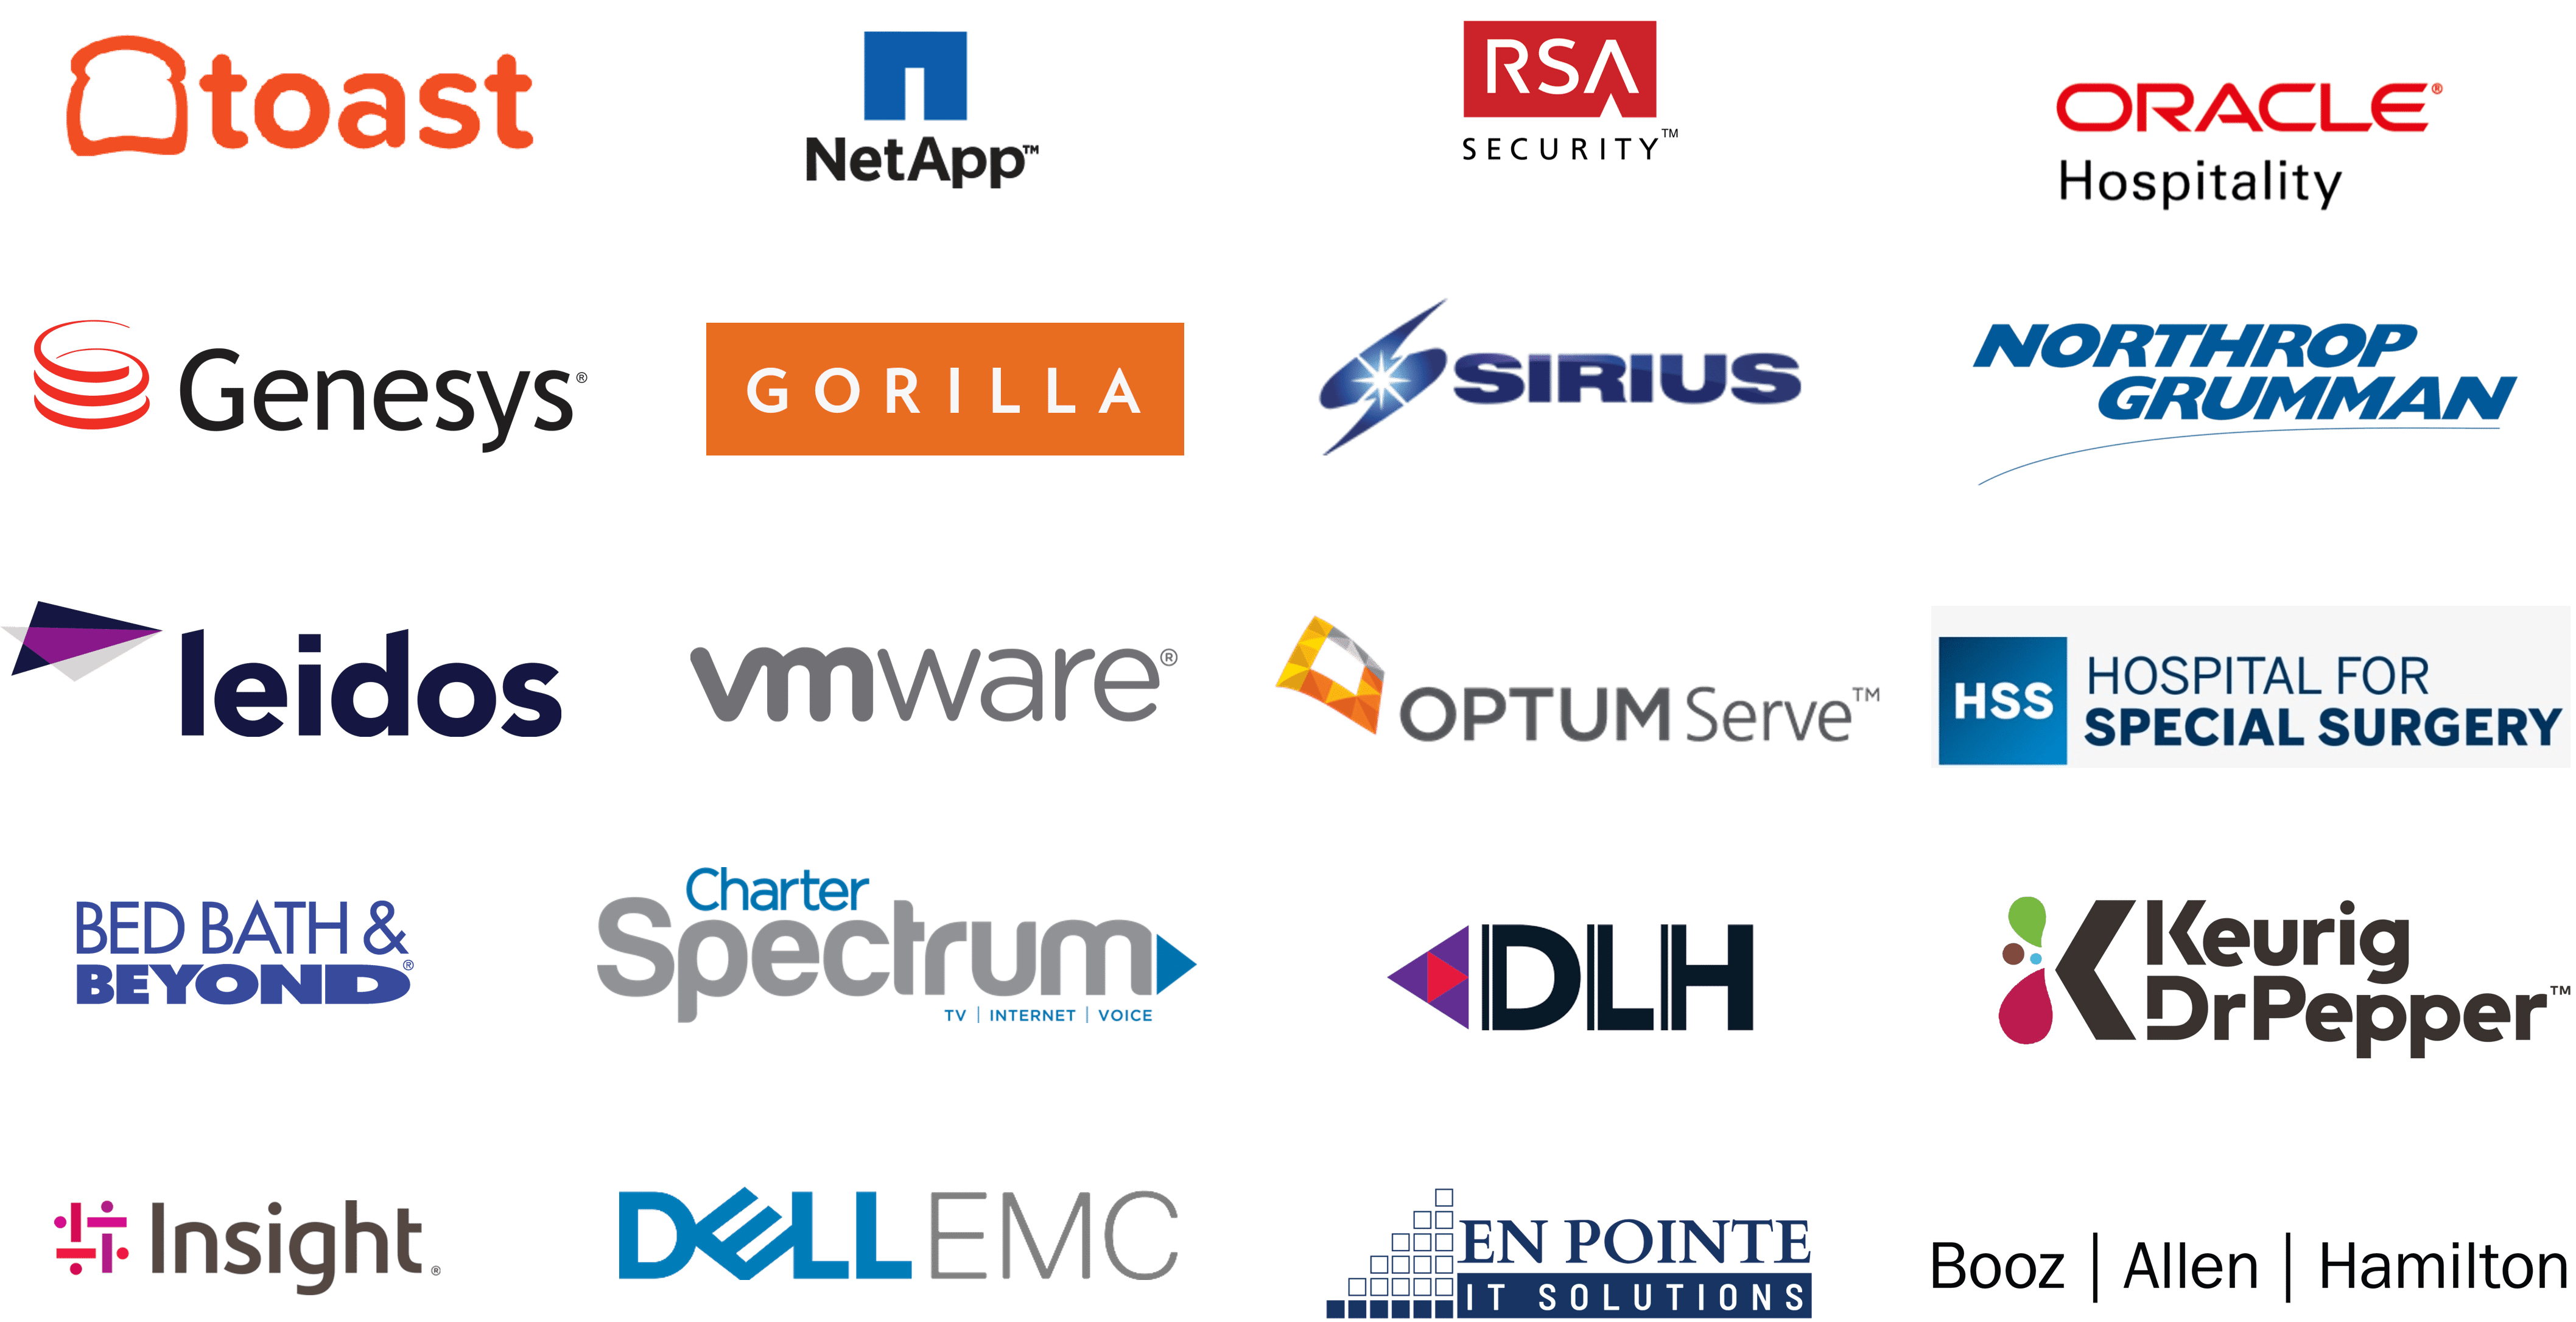 Key Partners and Clients